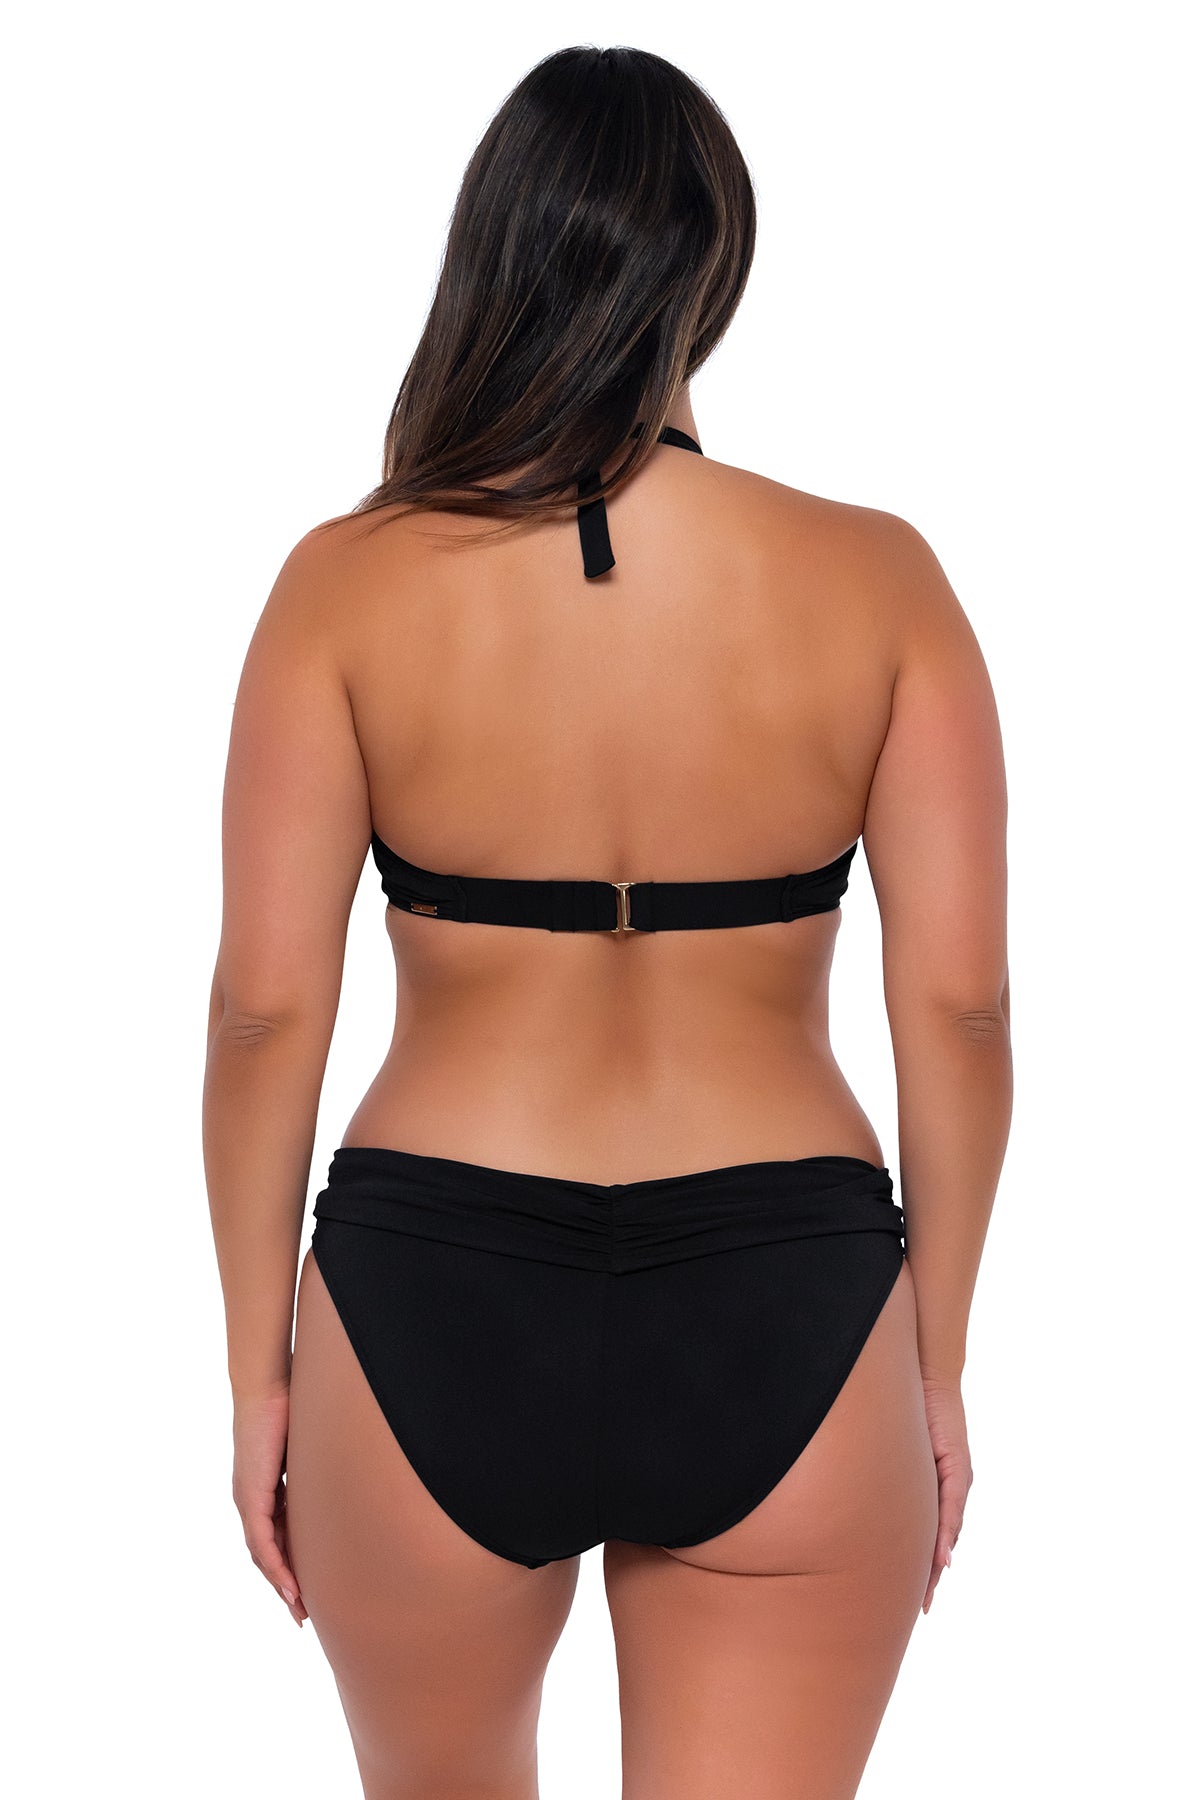 Back pose #1 of Nicky wearing Sunsets Black Muse Halter Top with matching Unforgettable Bottom bikini